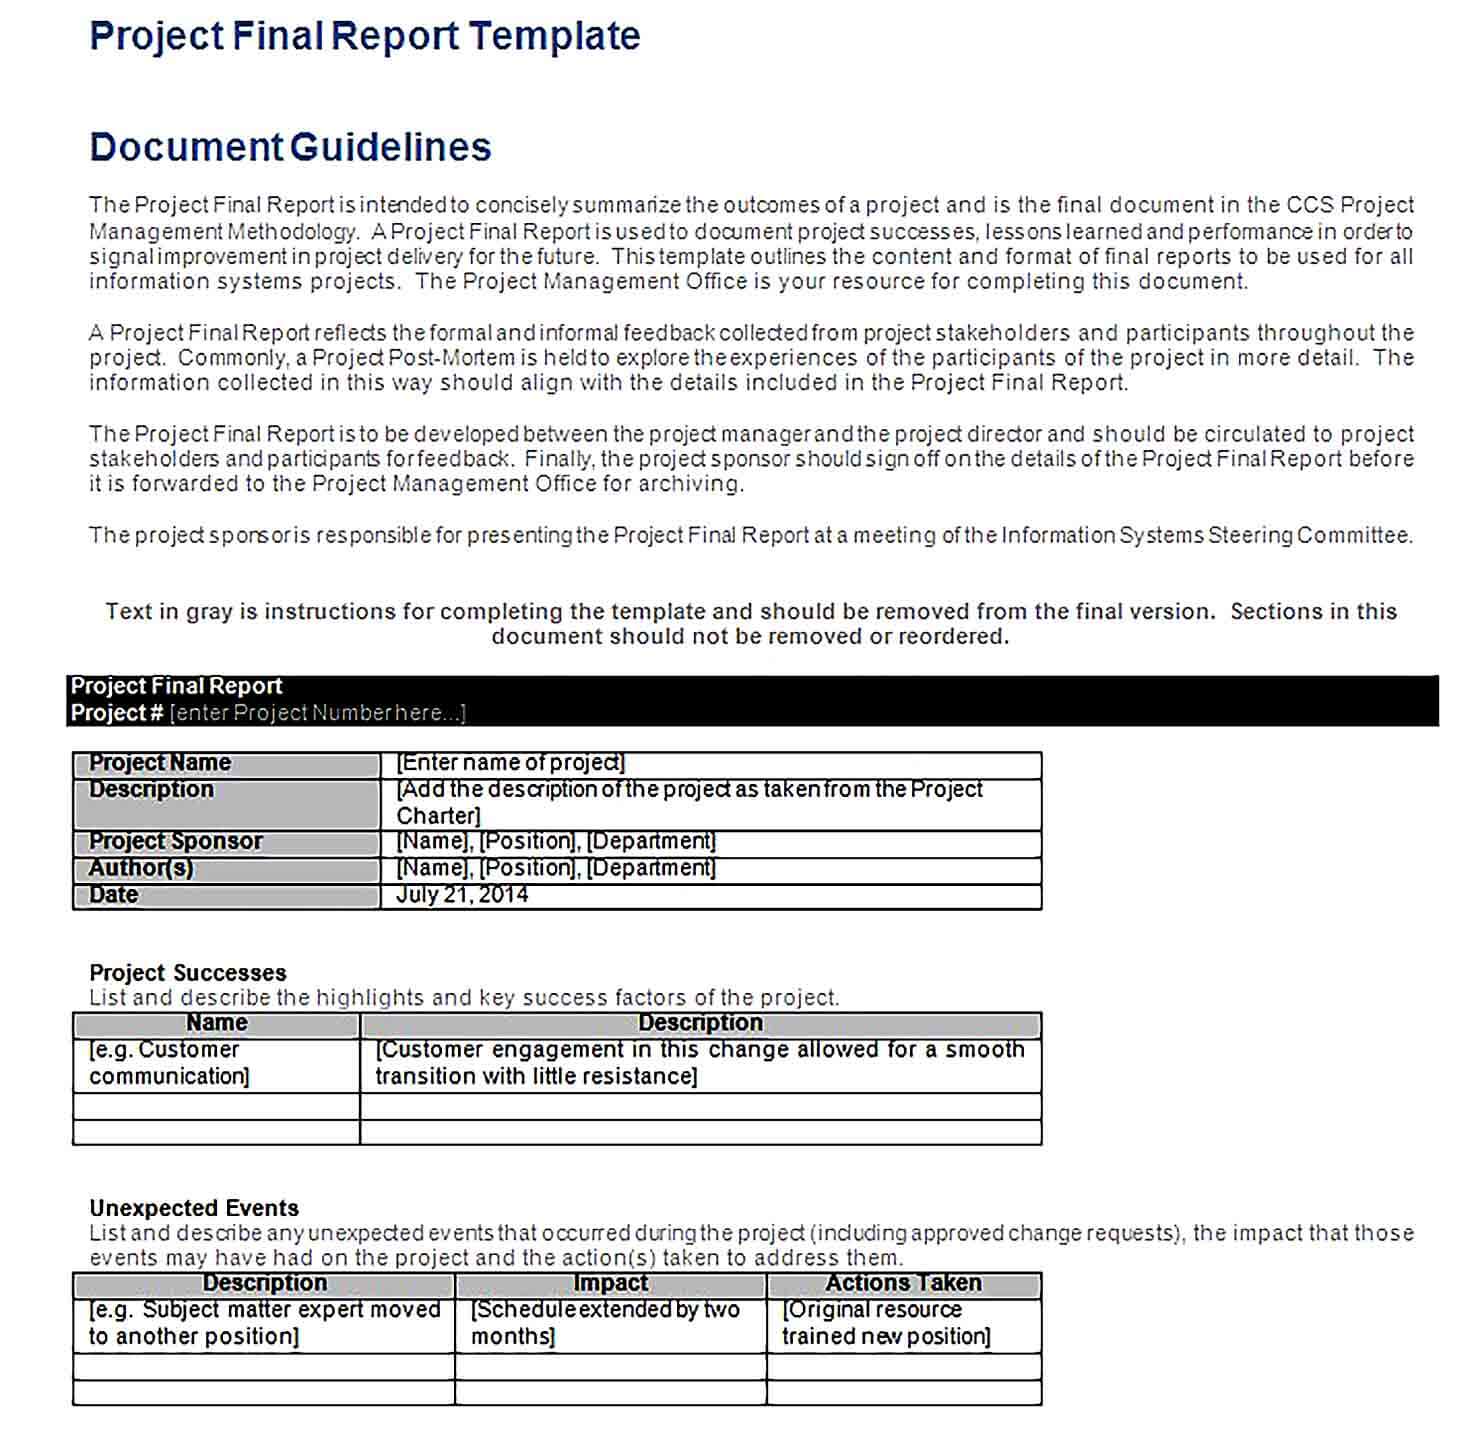 Sample Project Final Report Template